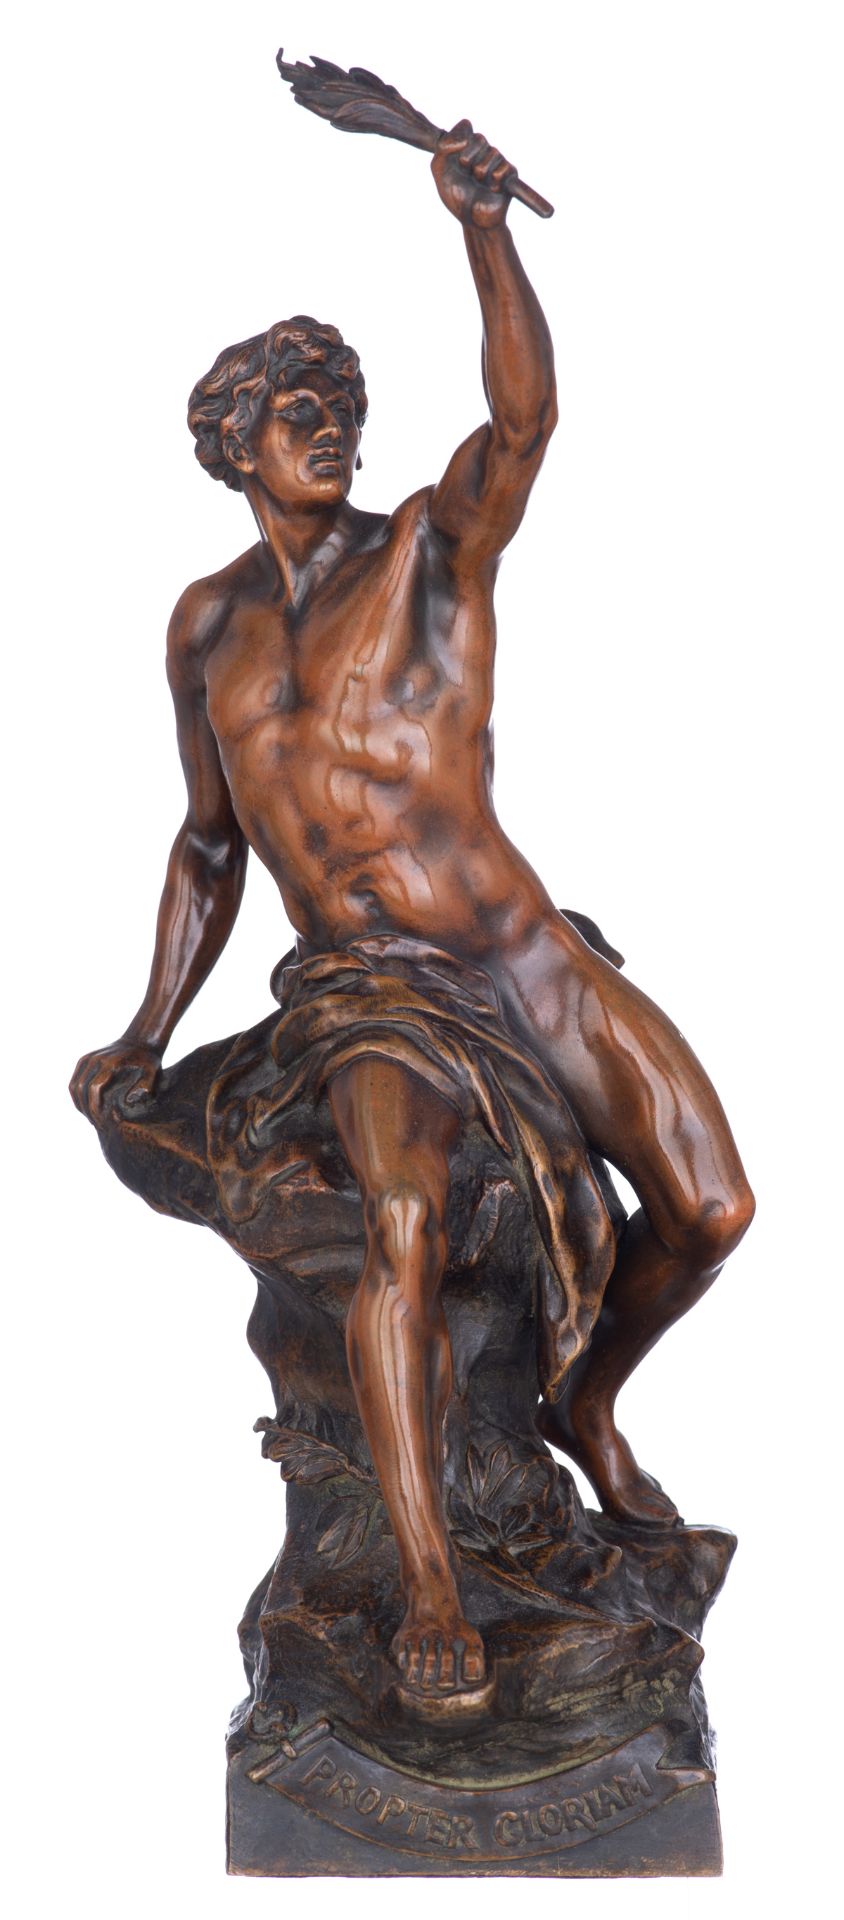 Picault E., 'Propter Gloriam' (For the Glory), patinated bronze H 33 cm